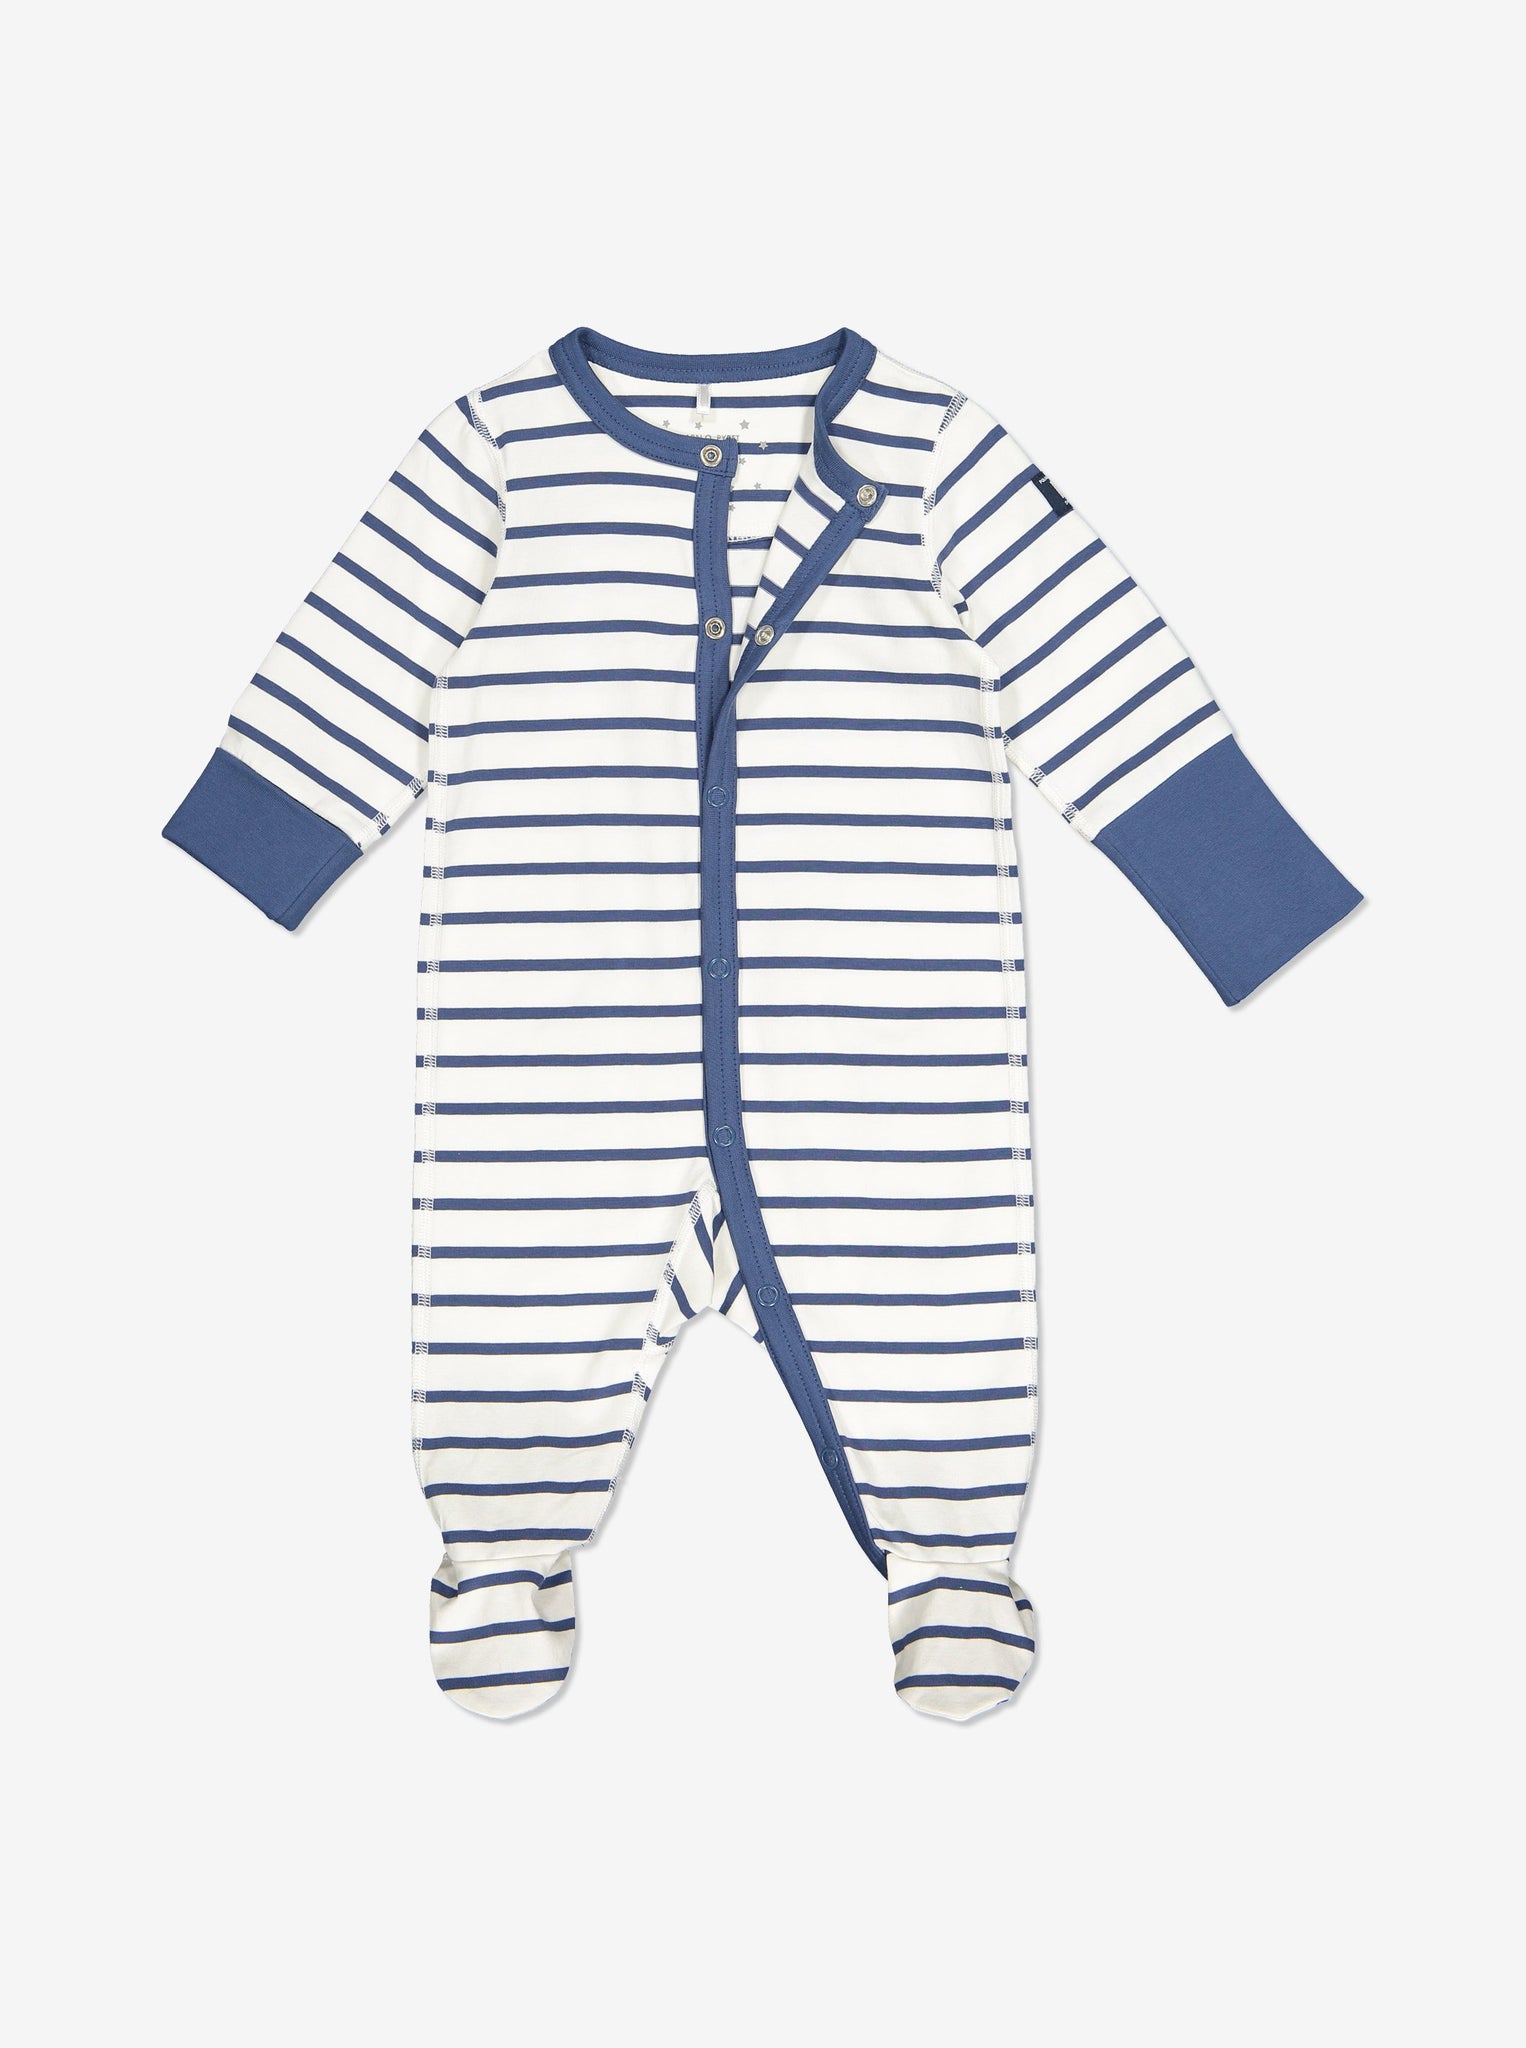 Onesie pyjamas for newborn to child, organic cotton womfortable and easy to use, ethical and long lasting polarn o. pyret